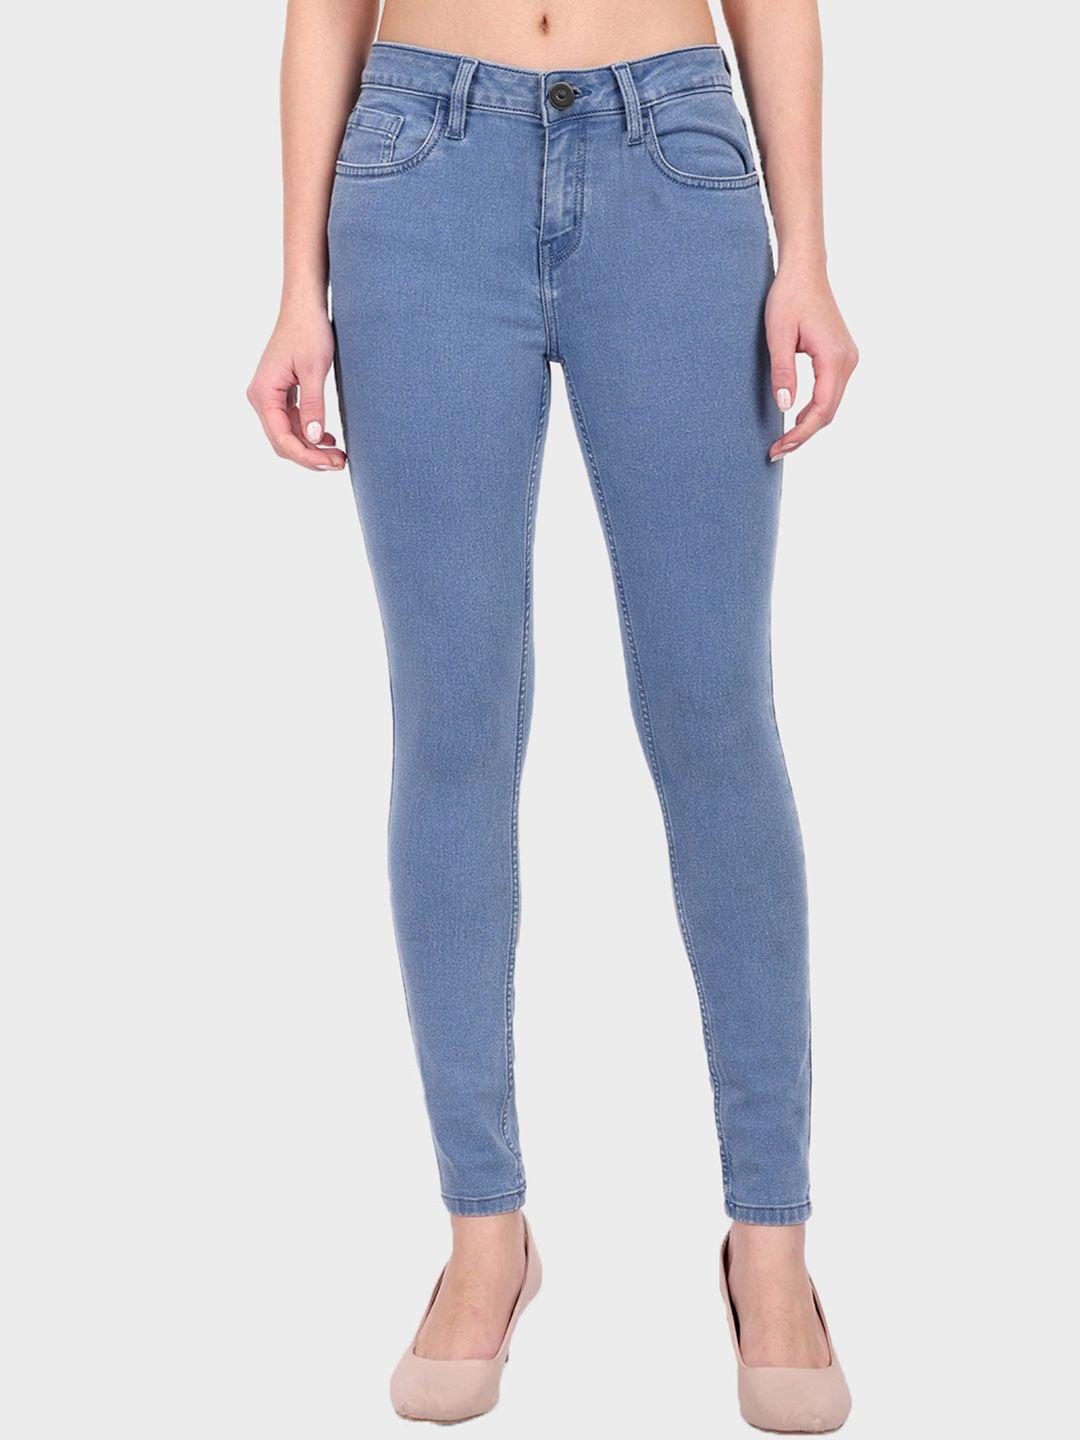 mast & harbour women blue skinny fit stretchable jeans